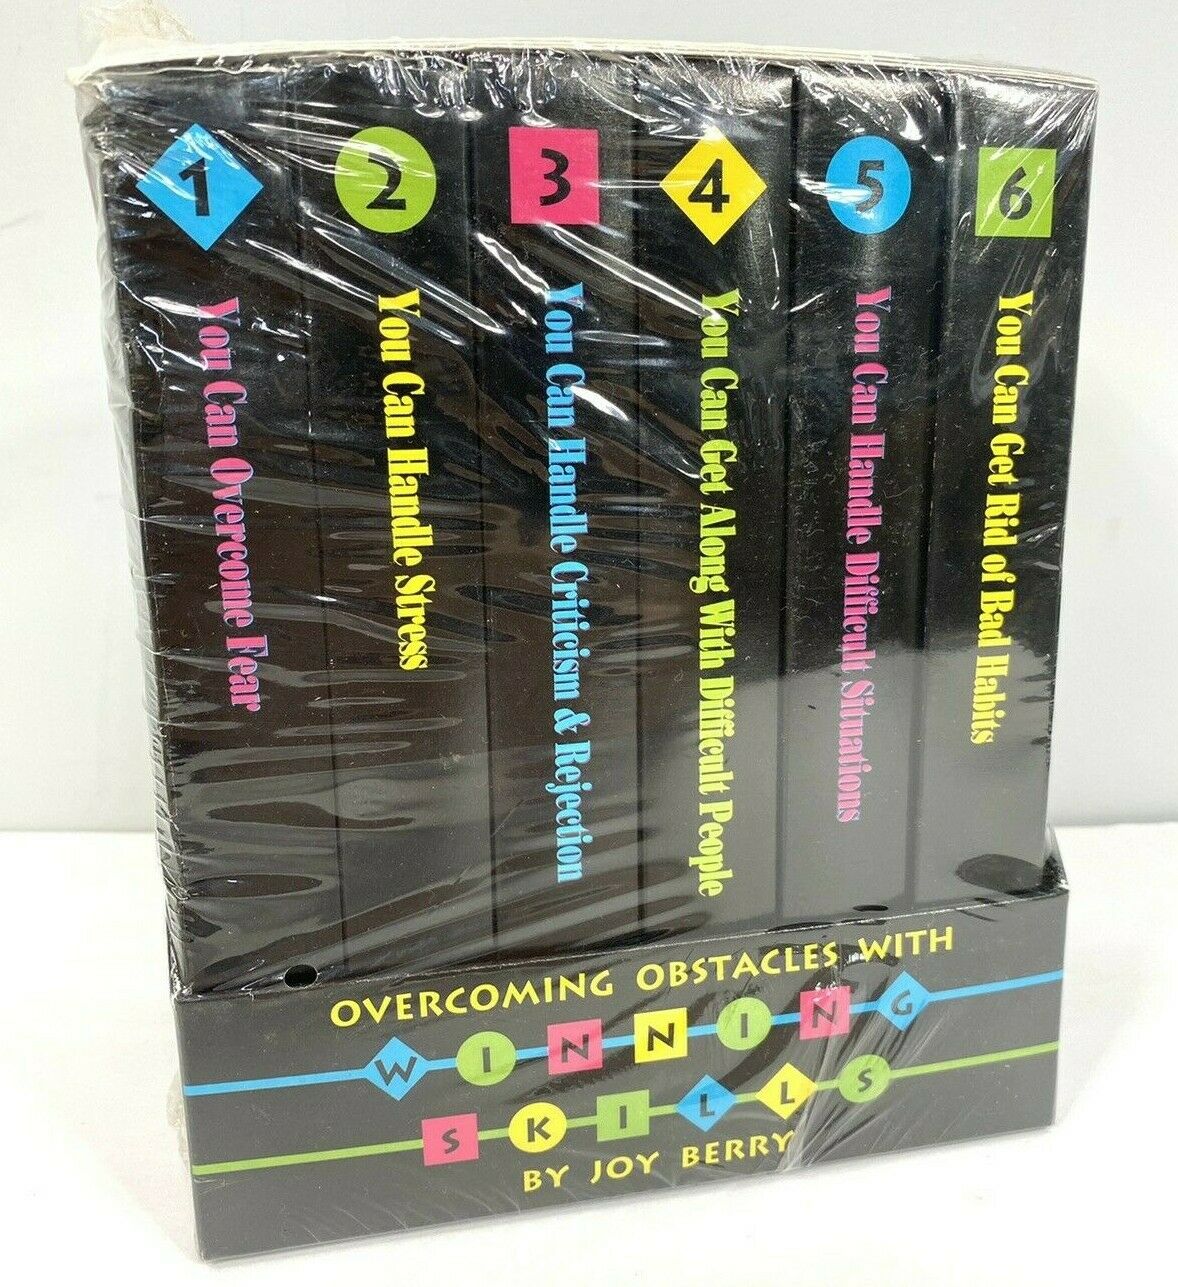 Get Rid Of Bad Habits Joy Berry Overcoming Obstacles 6 Audio Cassette Tapes New